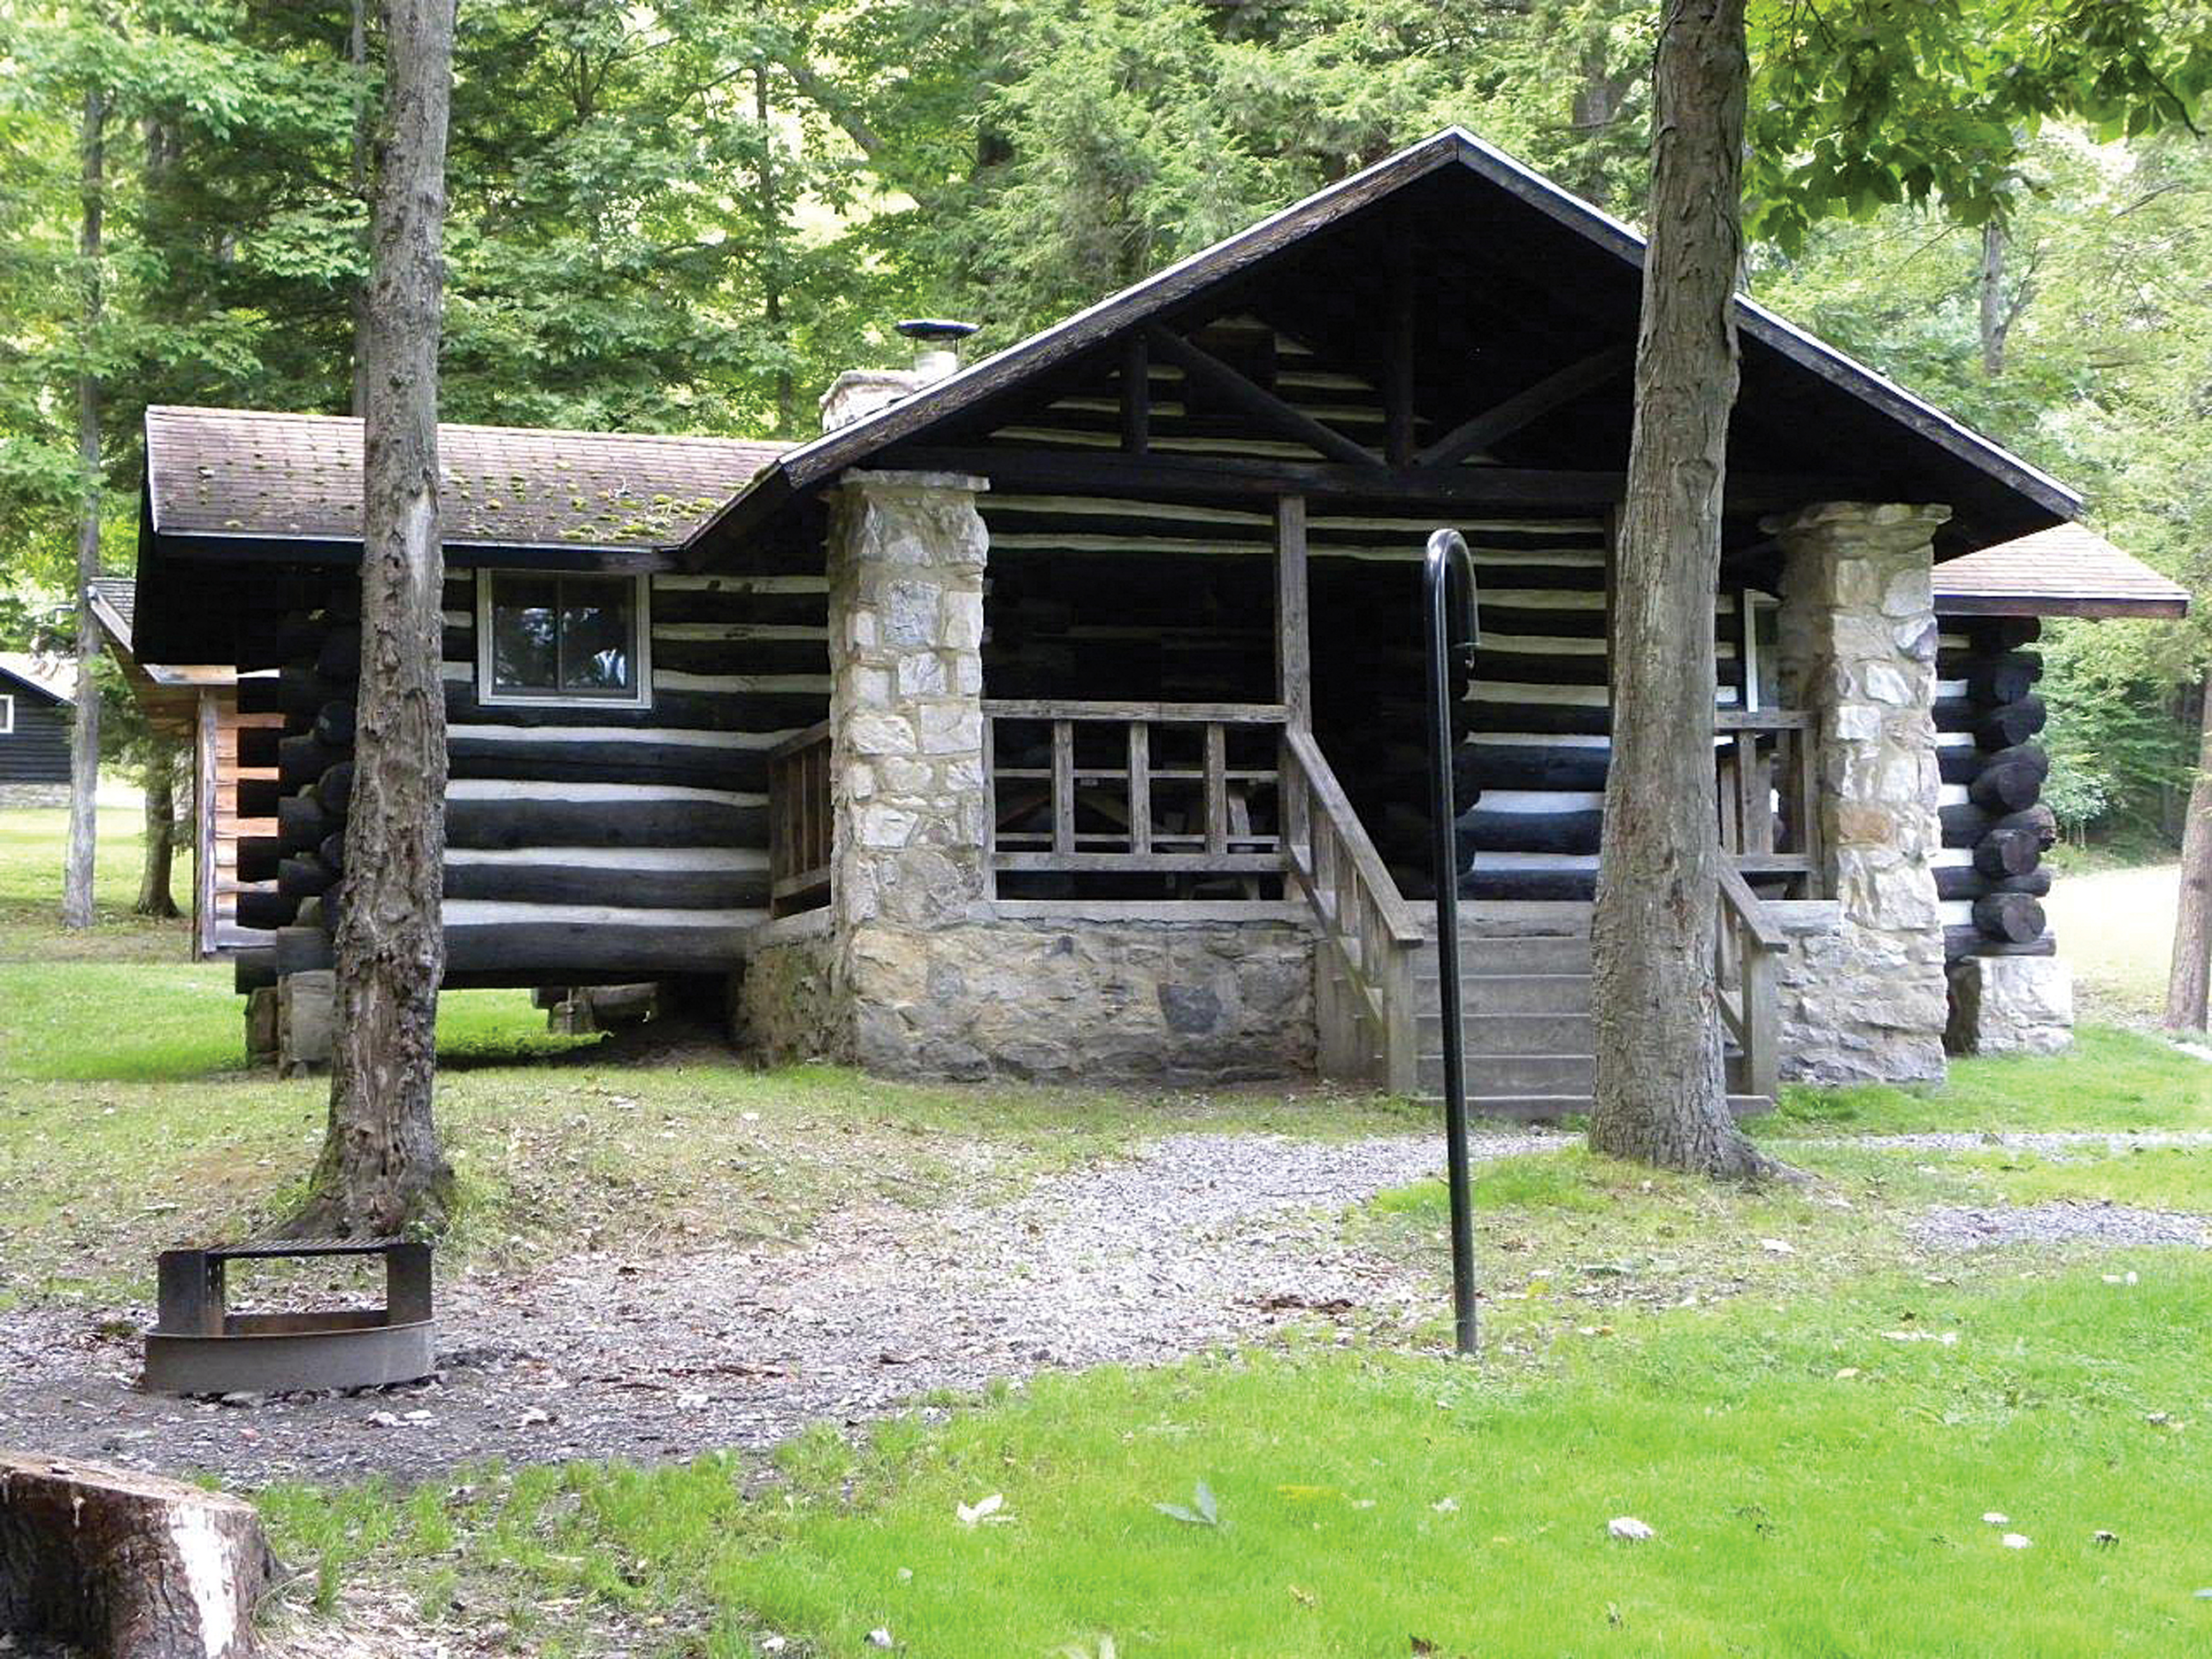 This is one of 16 cabins built by the Civilian Conservation Corps in the 1930s at the Parker Dam State Park, which receives electricity from DuBois-based United Electric Cooperative.